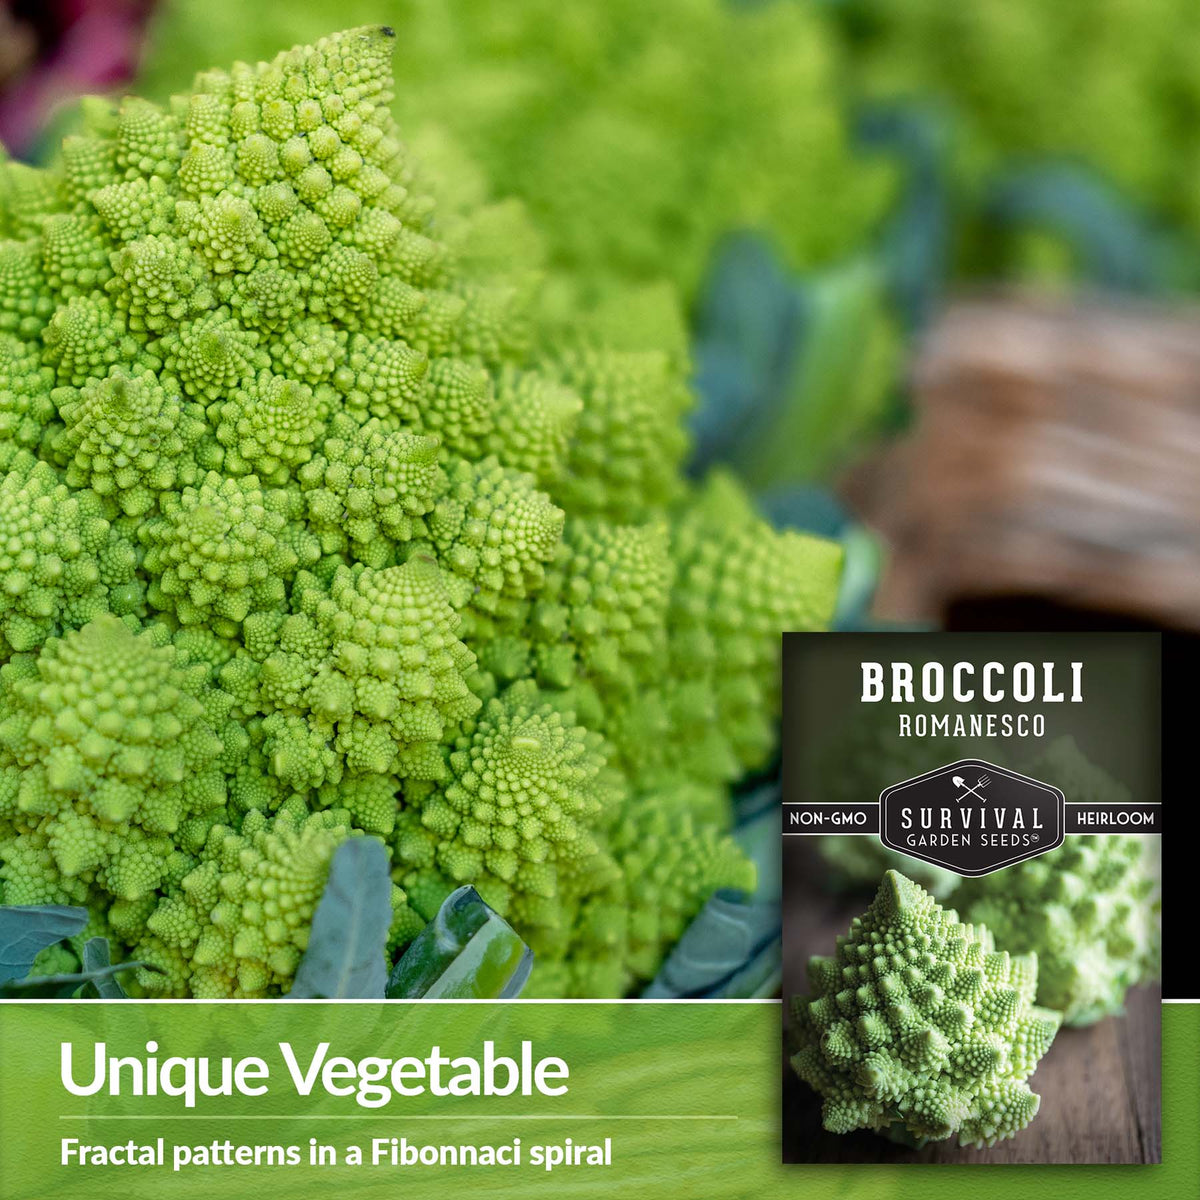 Romanesco Broccoli is a unique vegetable with a fractal pattern